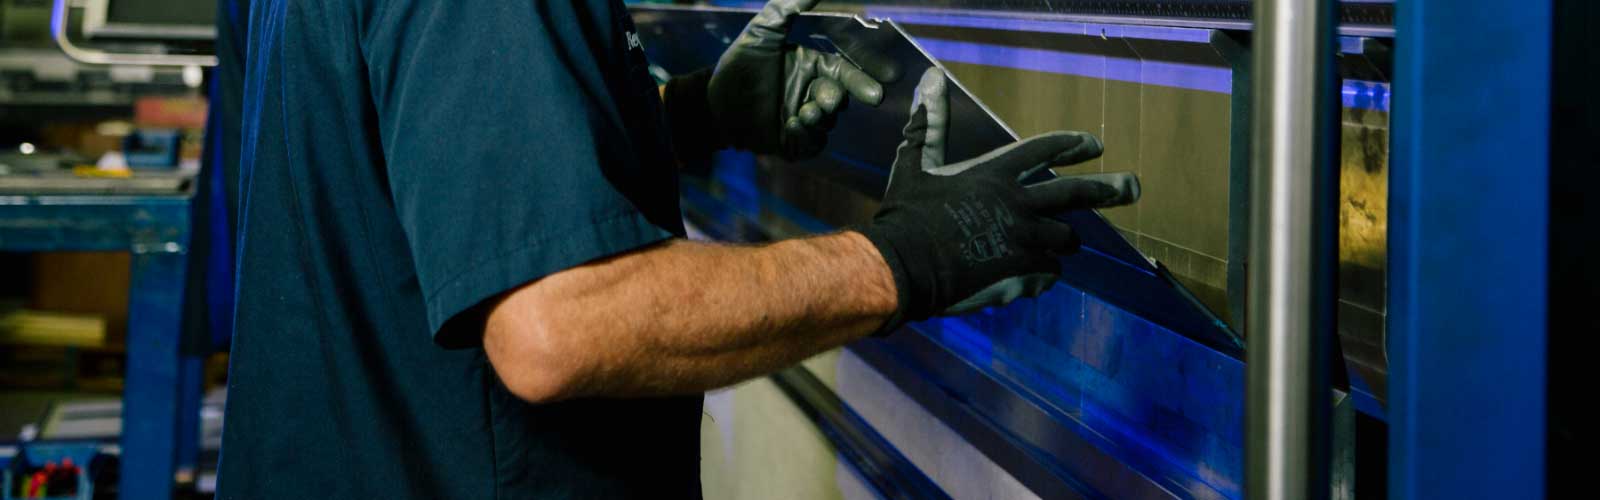 Wesgar's Terms and Conditions page banner image: person holding sheet metal part in bending machine